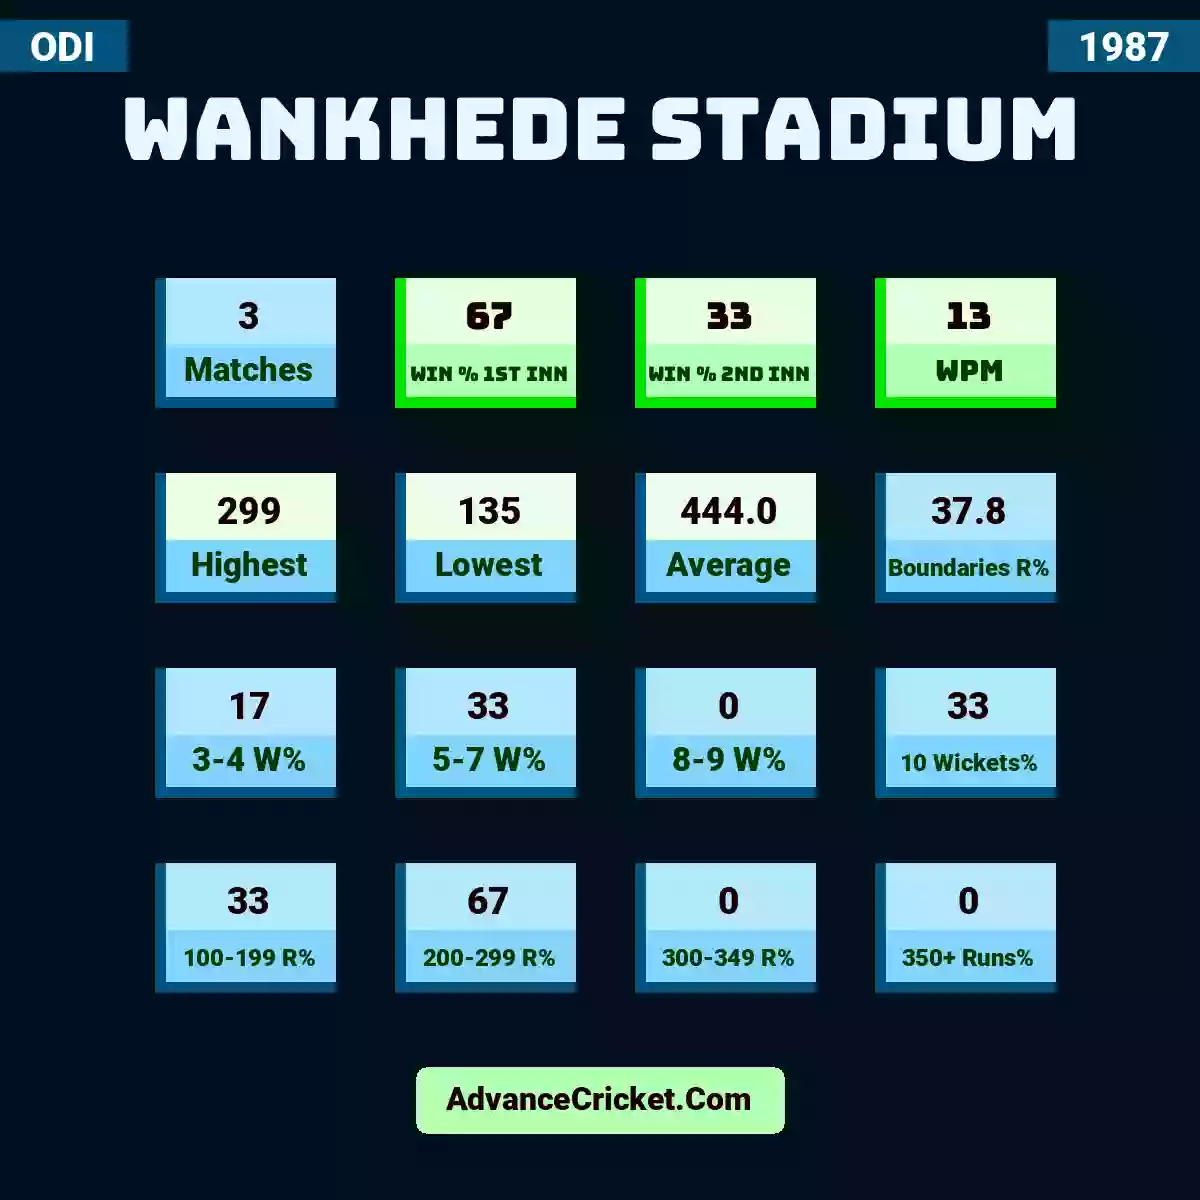 Image showing Wankhede Stadium with Matches: 3, Win % 1st Inn: 67, Win % 2nd Inn: 33, WPM: 13, Highest: 299, Lowest: 135, Average: 444.0, Boundaries R%: 37.8, 3-4 W%: 17, 5-7 W%: 33, 8-9 W%: 0, 10 Wickets%: 33, 100-199 R%: 33, 200-299 R%: 67, 300-349 R%: 0, 350+ Runs%: 0.